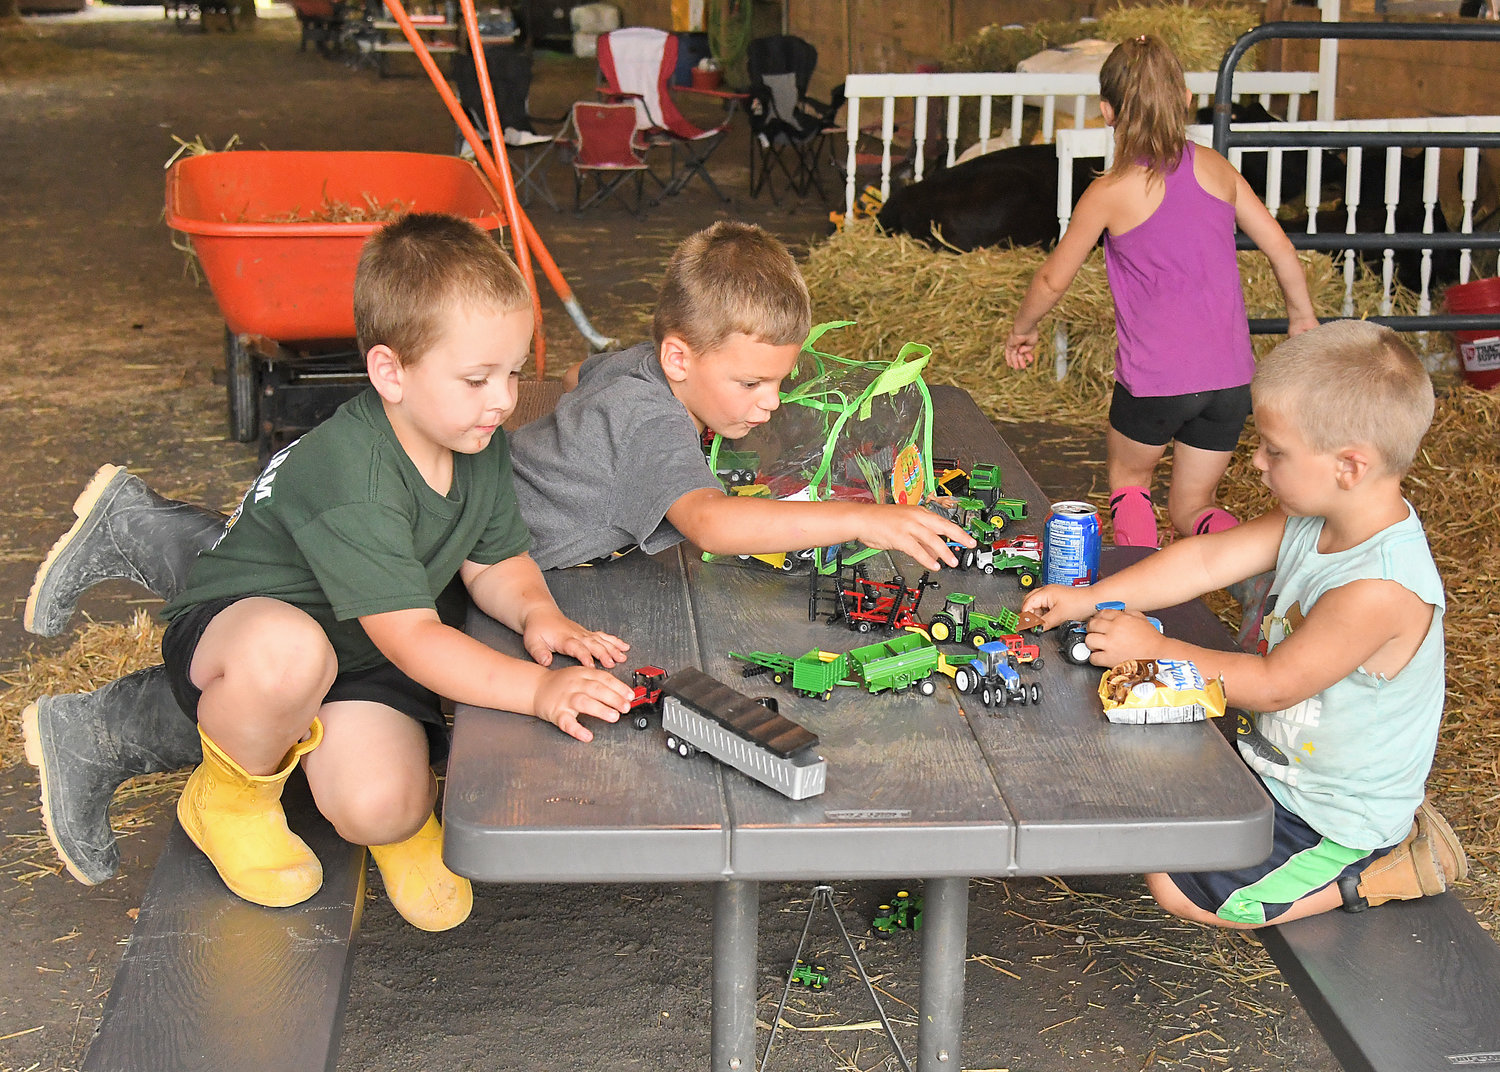 BoonvilleOneida County Fair returns after COVID hiatus with rides